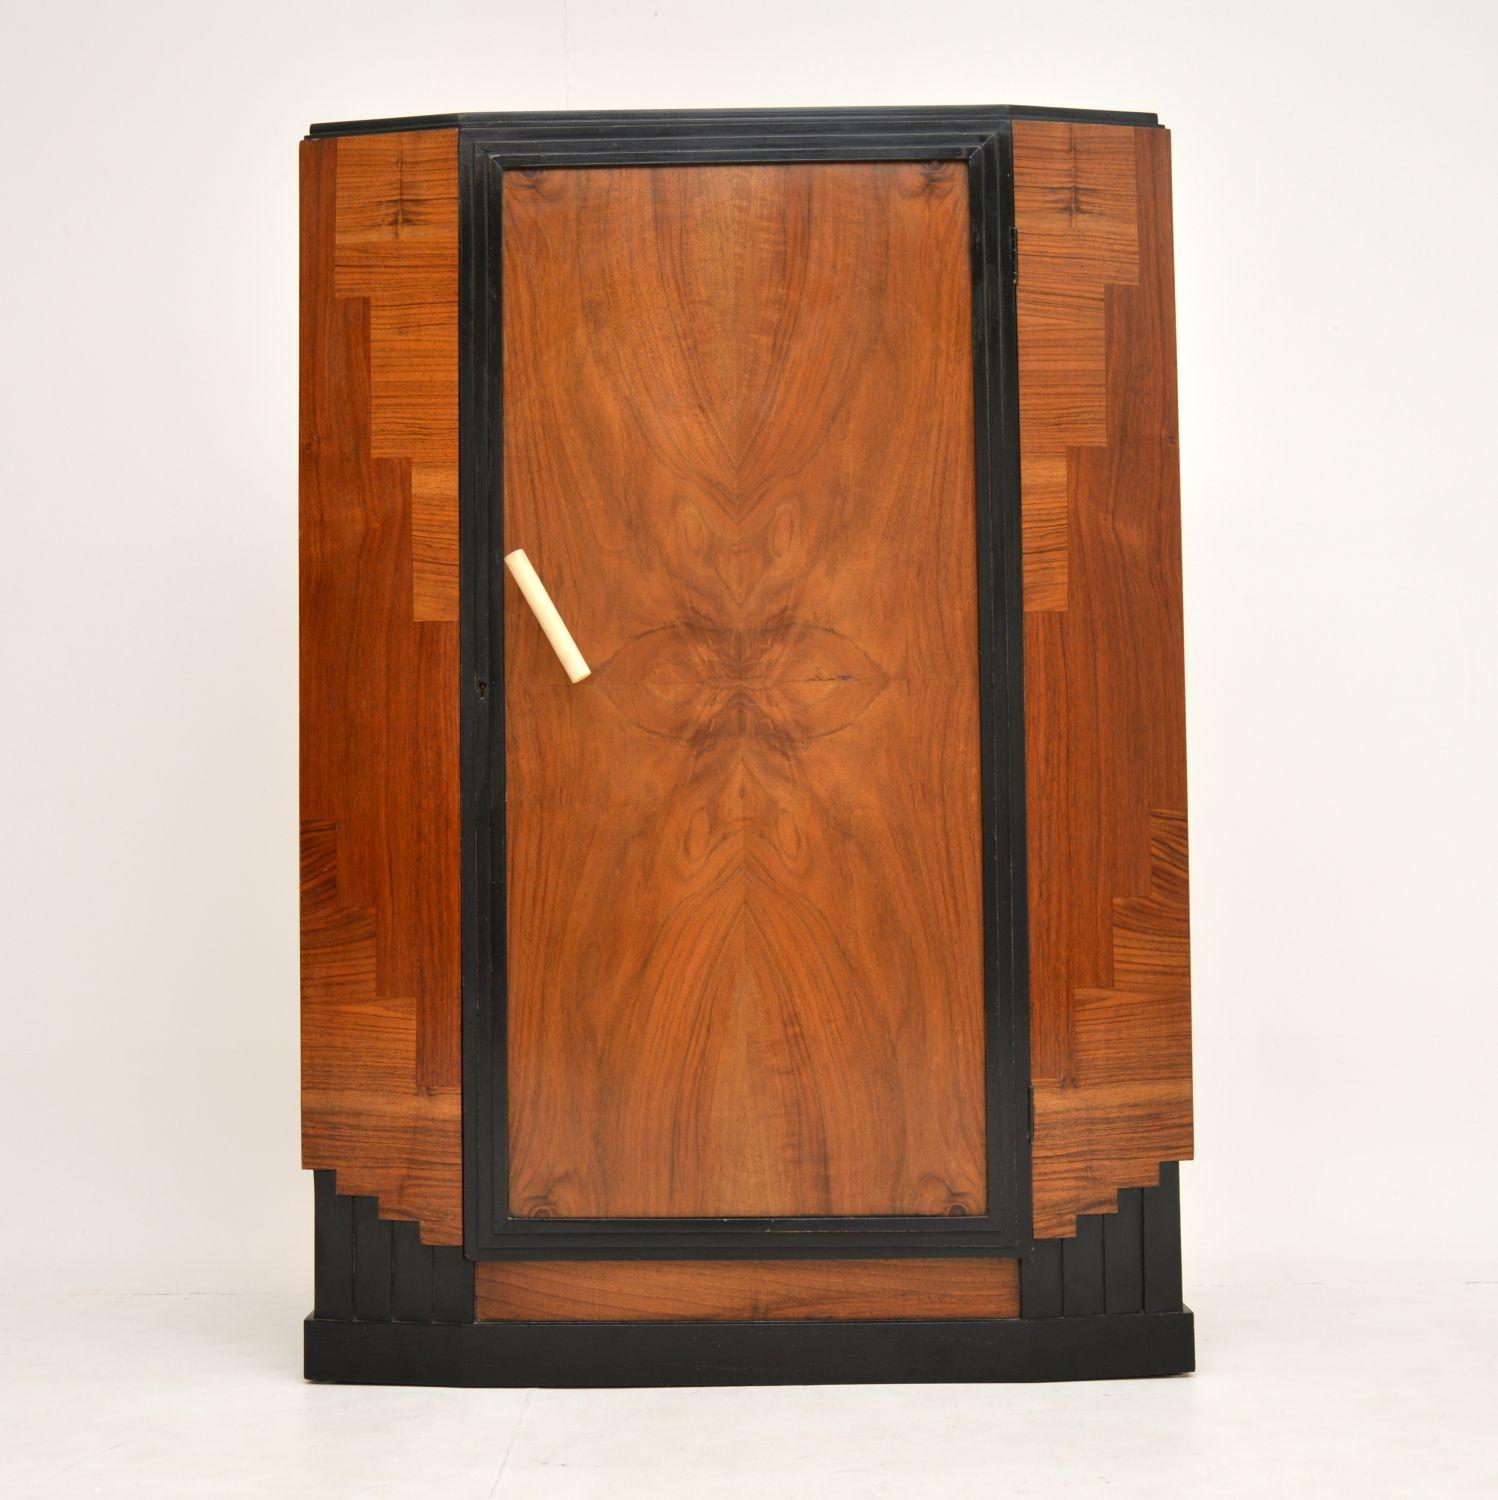 A beautiful and stylish original Art Deco period compactum wardrobe. This is made from walnut, veneered on solid wood in a stunning geometrical design.

This dates from the 1920s-1930s, it has been recently French polished and is in superb